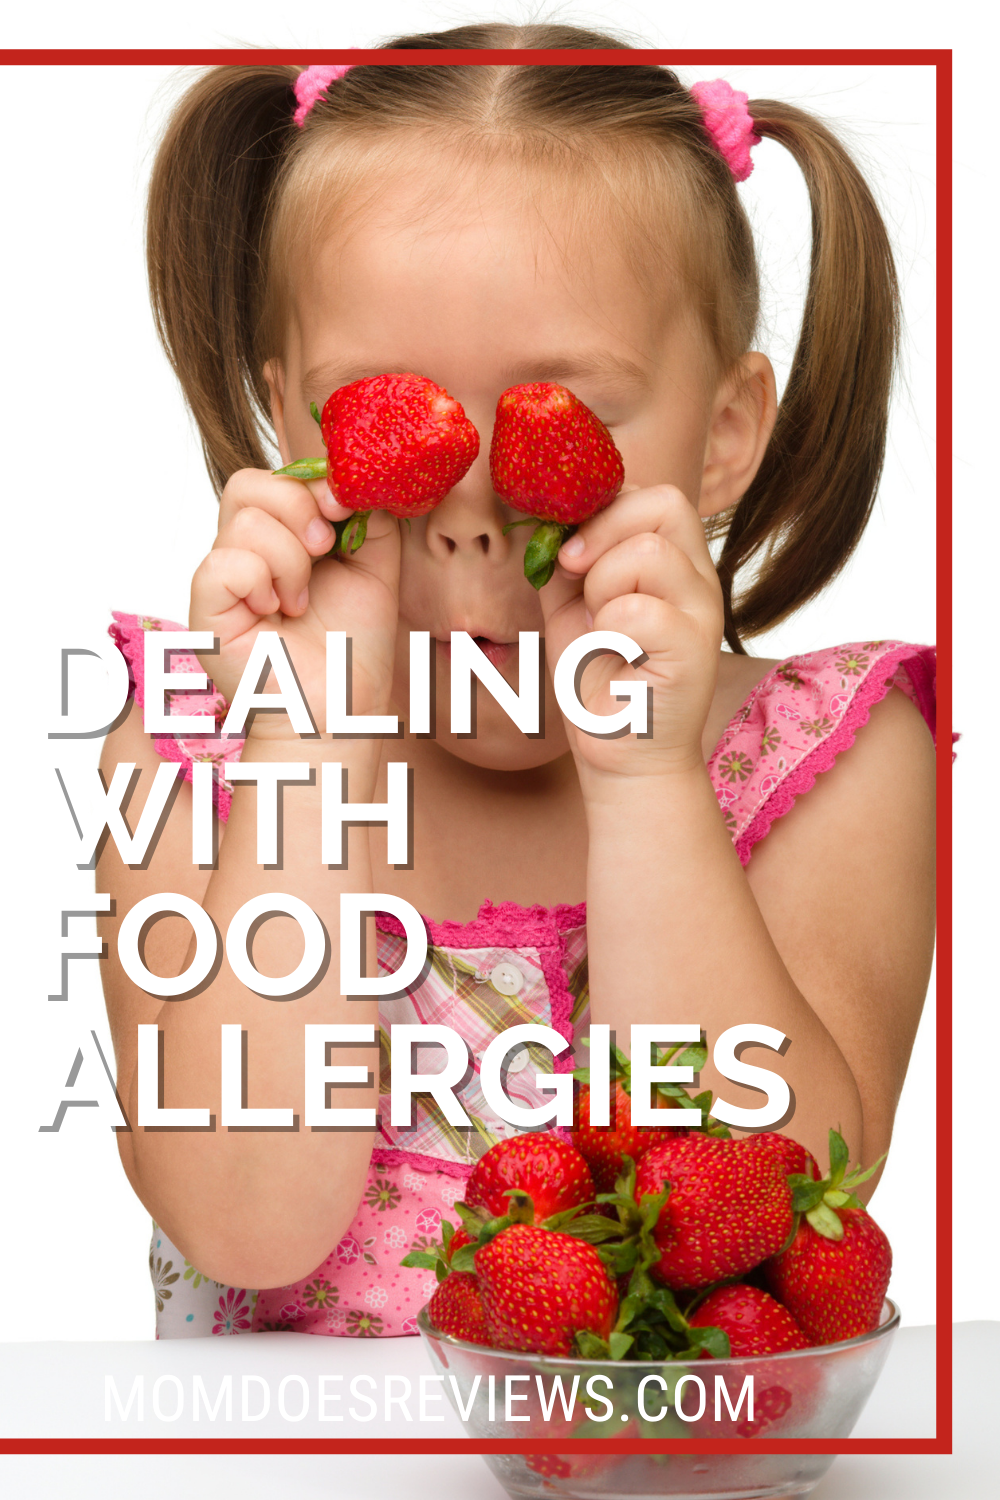 Extra Precautions to Take When Your Kids Have Food Allergies